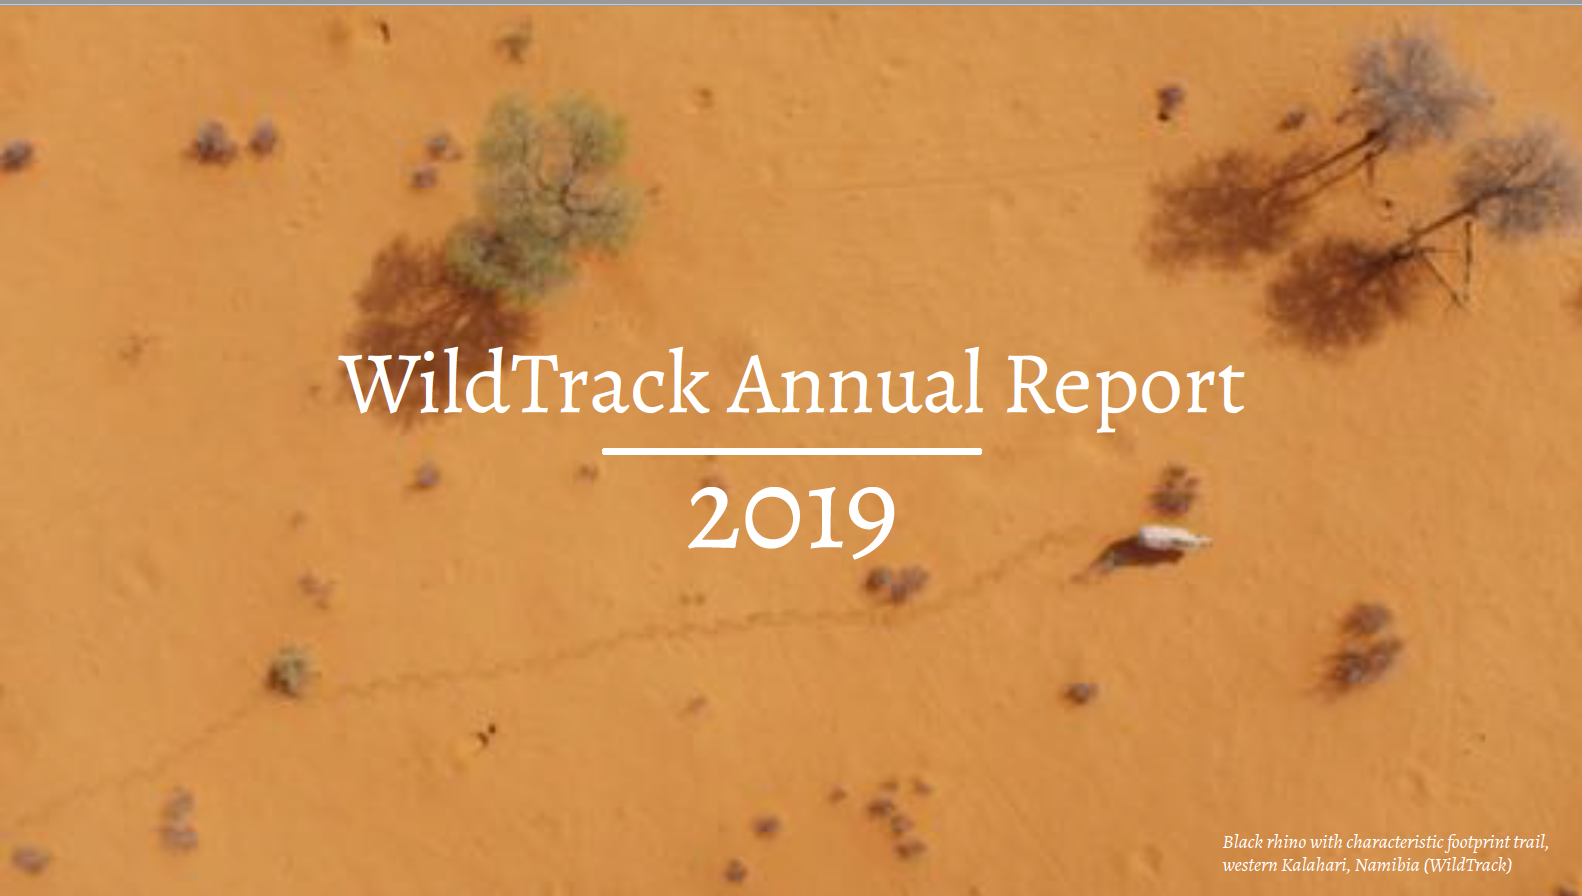 WildTrack Annual Report 2019 now out